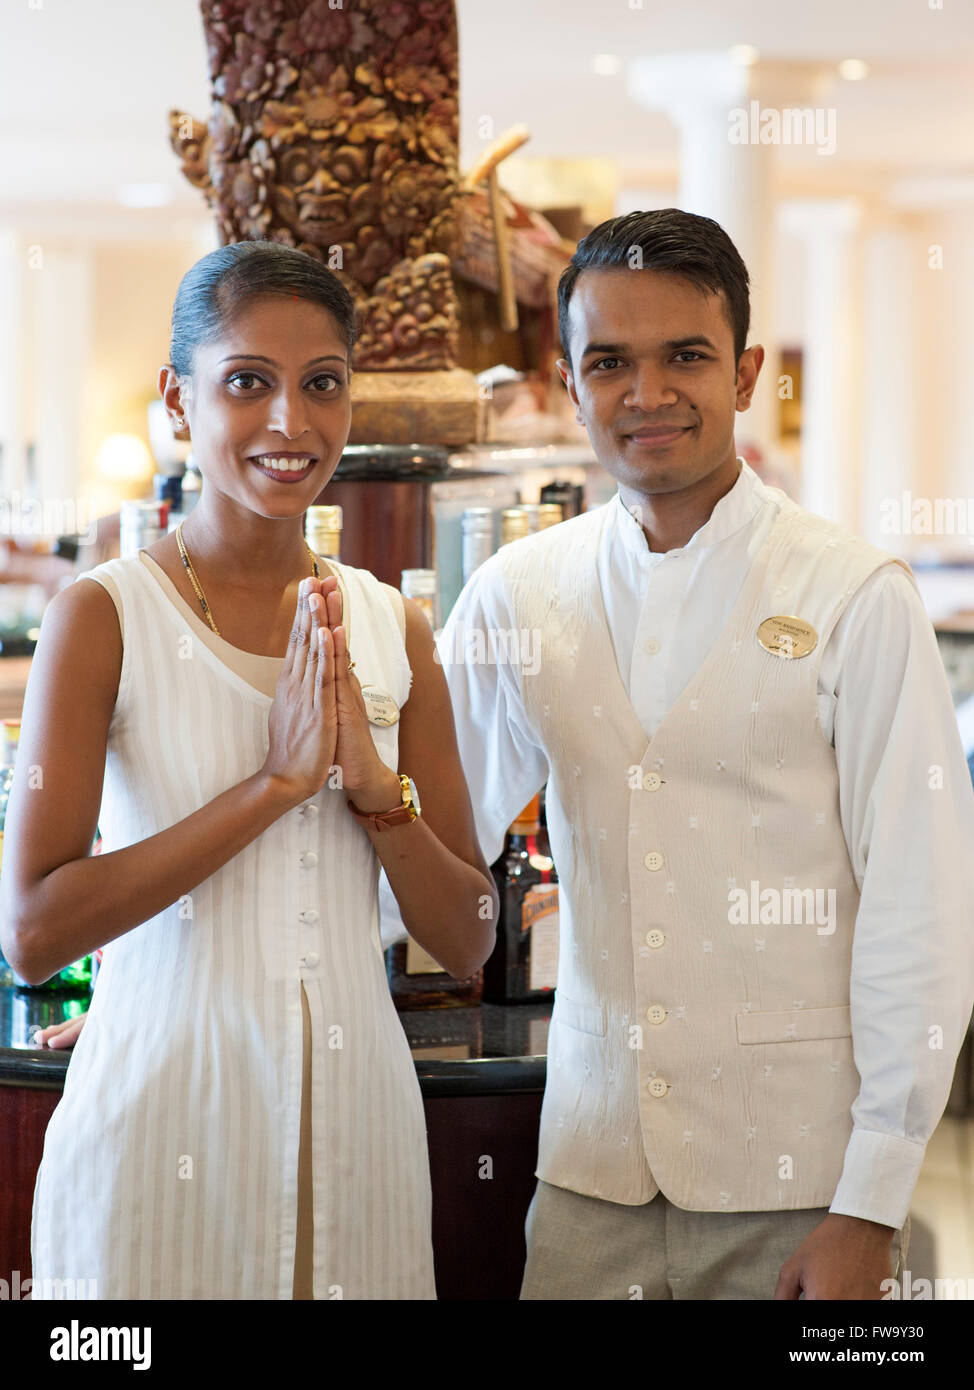 Bar staff at the Residence hotel in Mauritius. Stock Photo